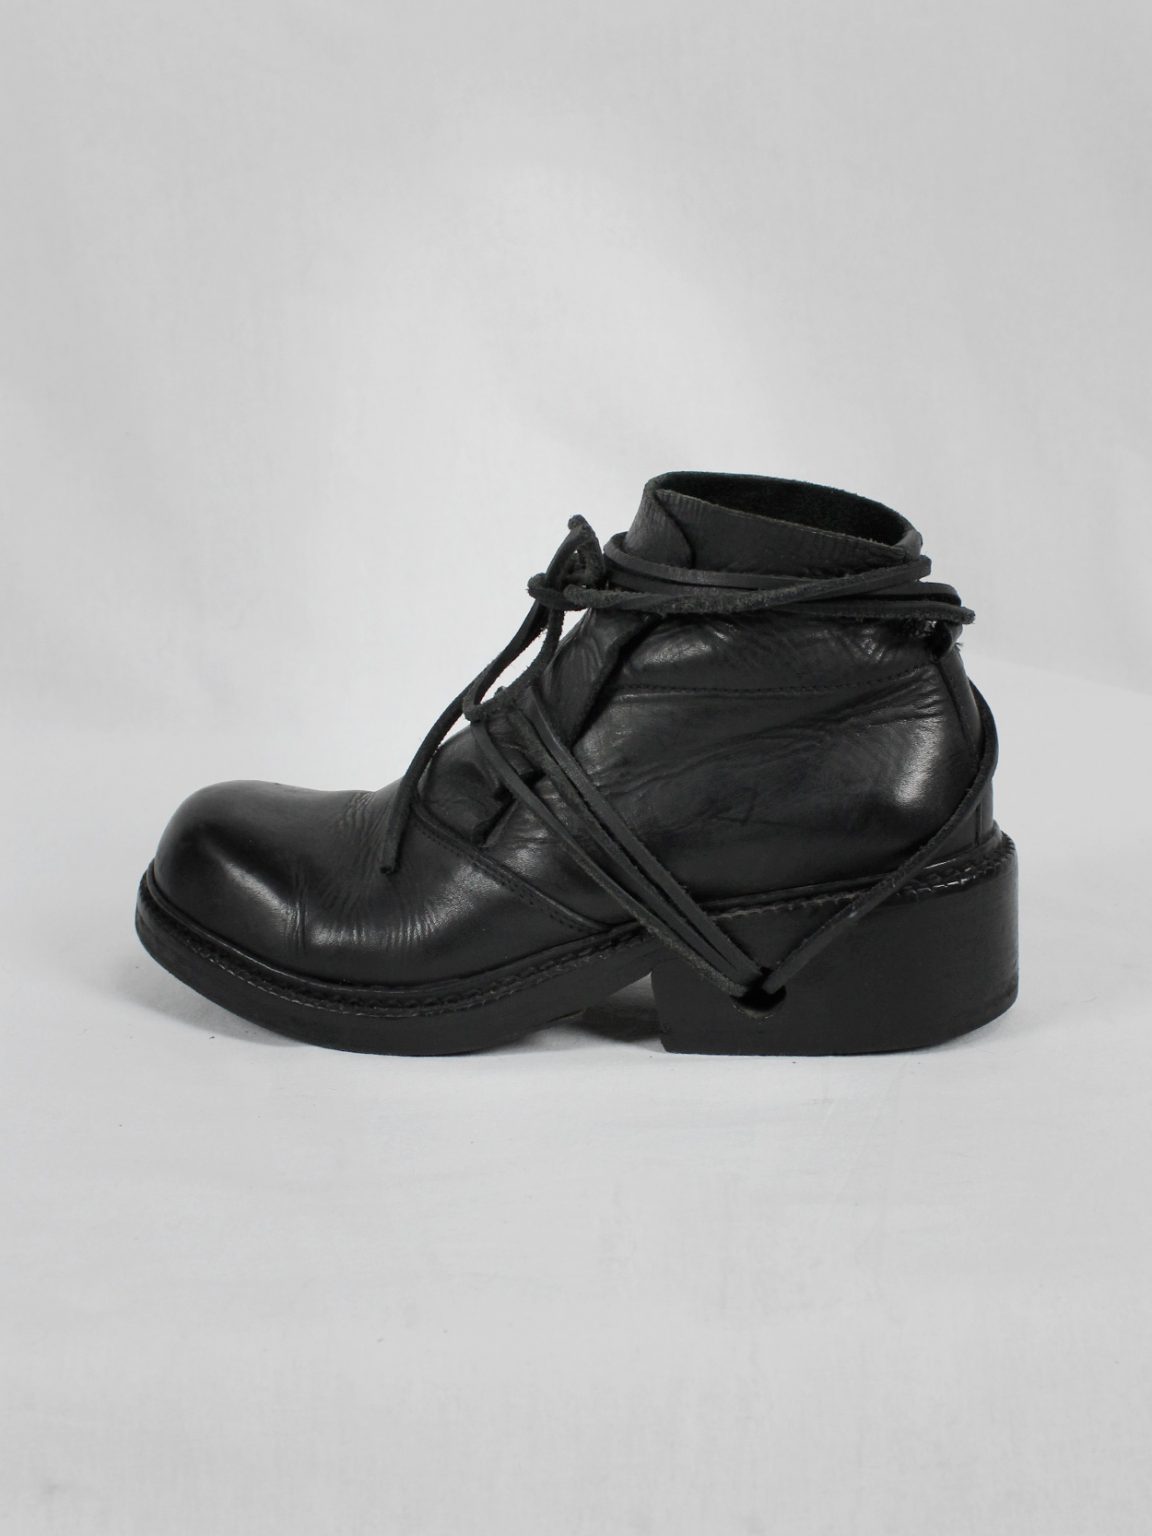 Dirk Bikkembergs black boots with flap and laces through the soles (38) — late 90's